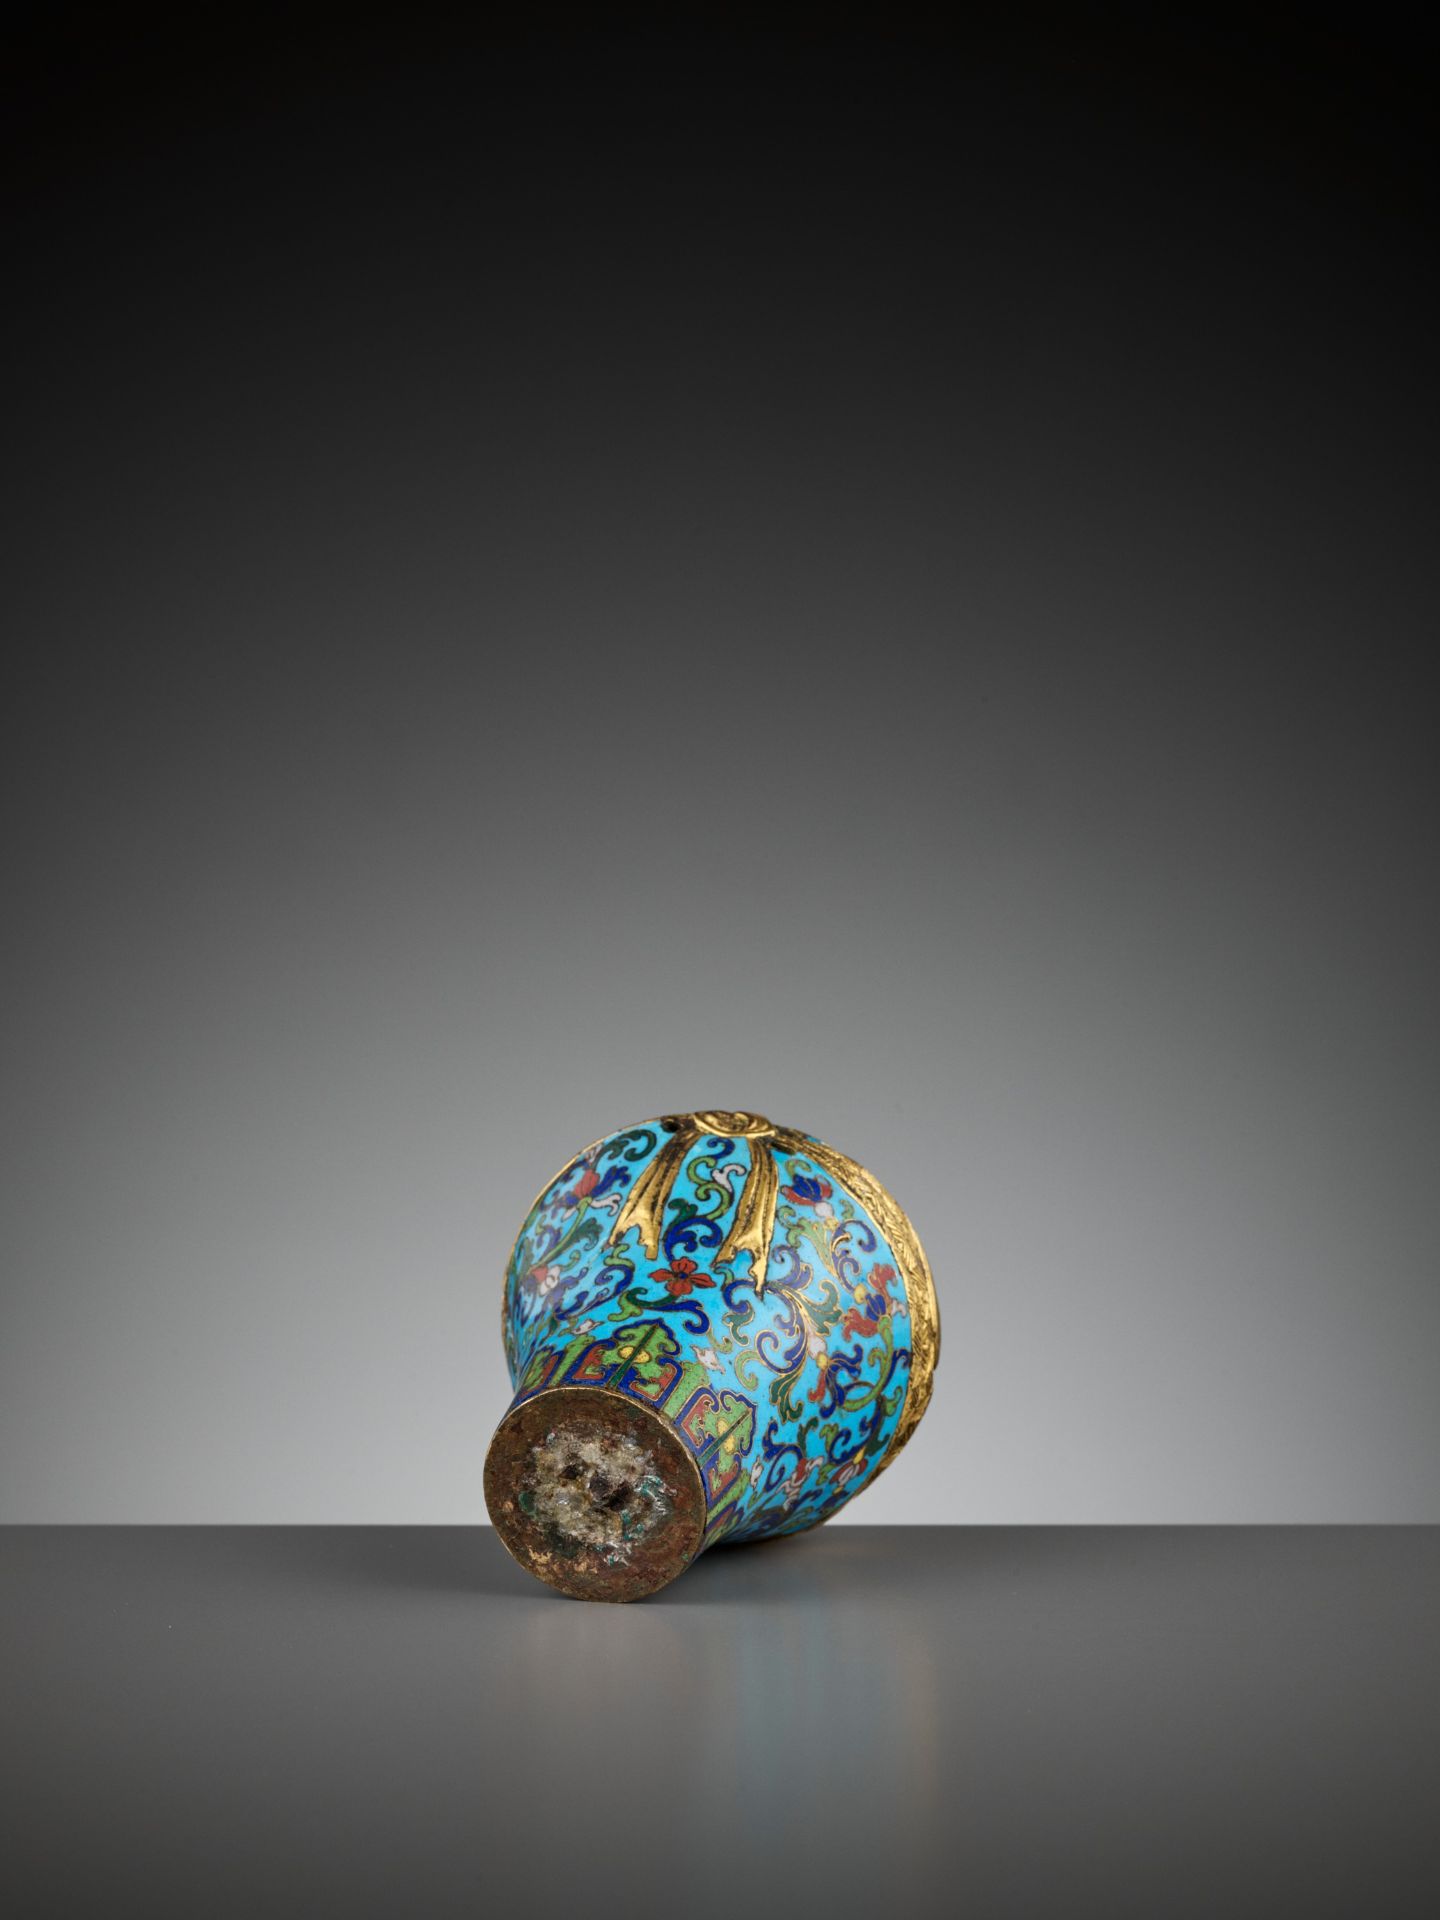 A RARE CLOISONNE ENAMEL 'SASH-TIED' BALUSTER VASE, ATTRIBUTED TO THE IMPERIAL WORKSHOPS, QIANLONG - Image 9 of 10